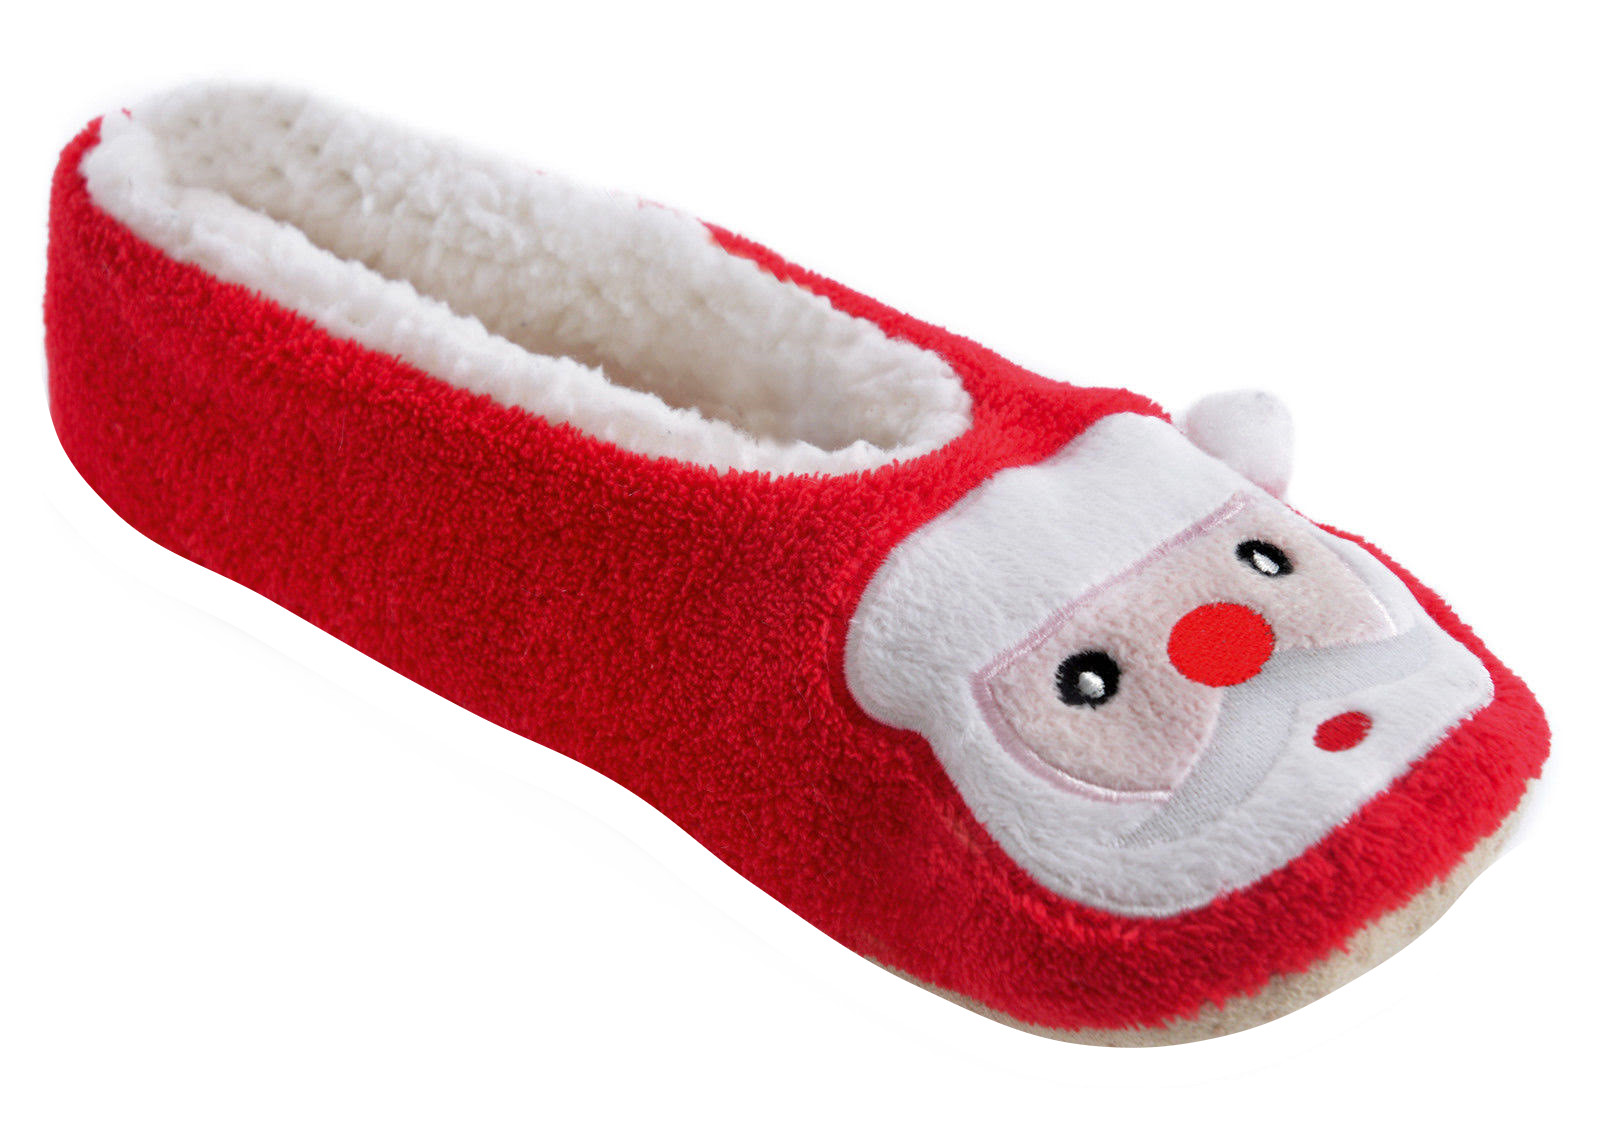 Ladies Red Christmas Slippers FT1061.jpg  by Thingimijigs